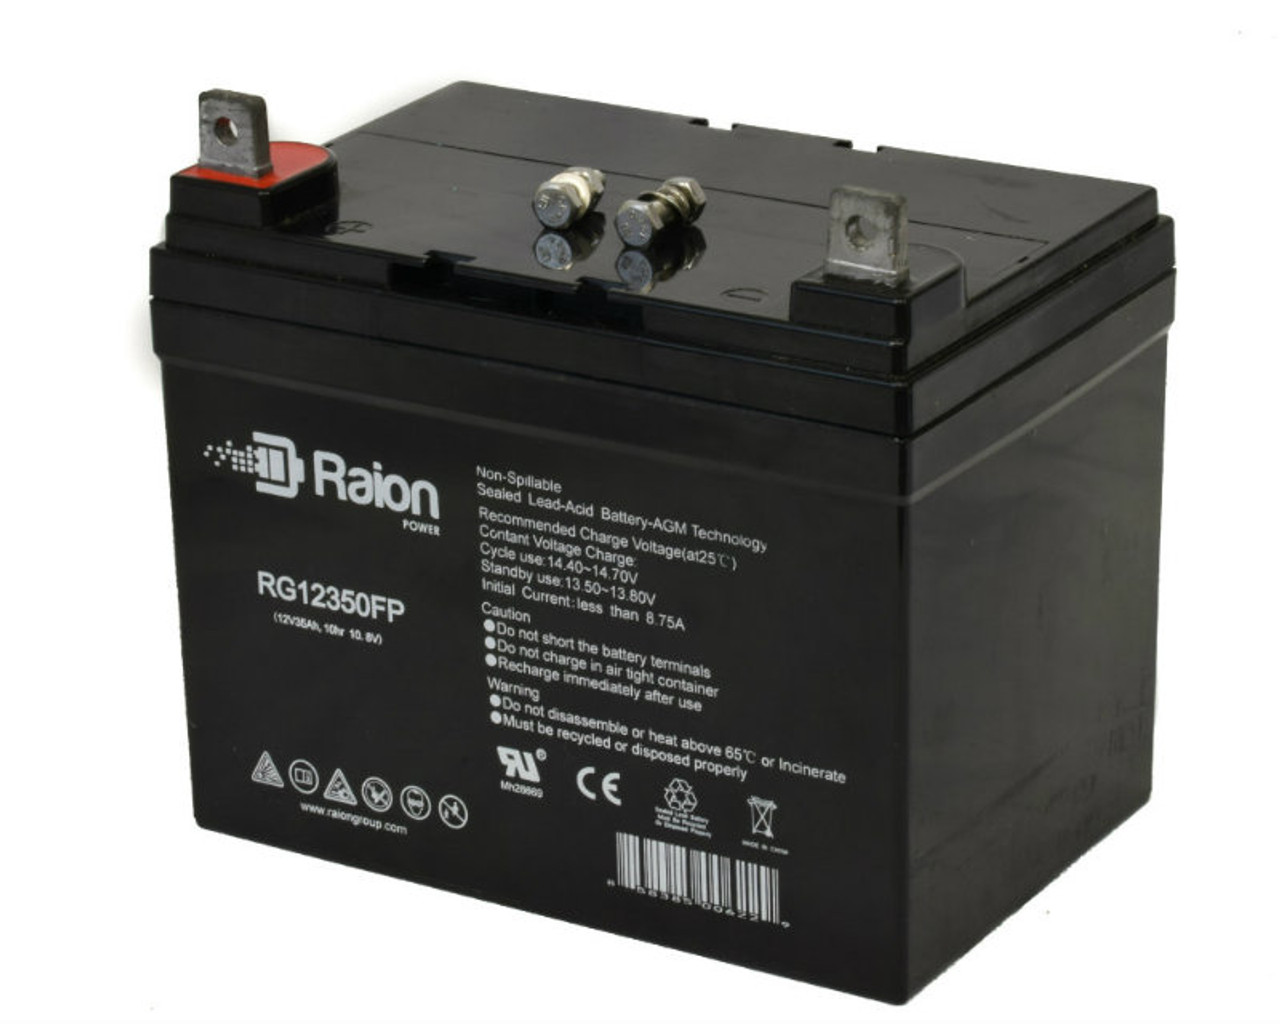 Raion Power Replacement 12V 35Ah RG12350FP Battery for E.T. Rugg Co. 5049-E2